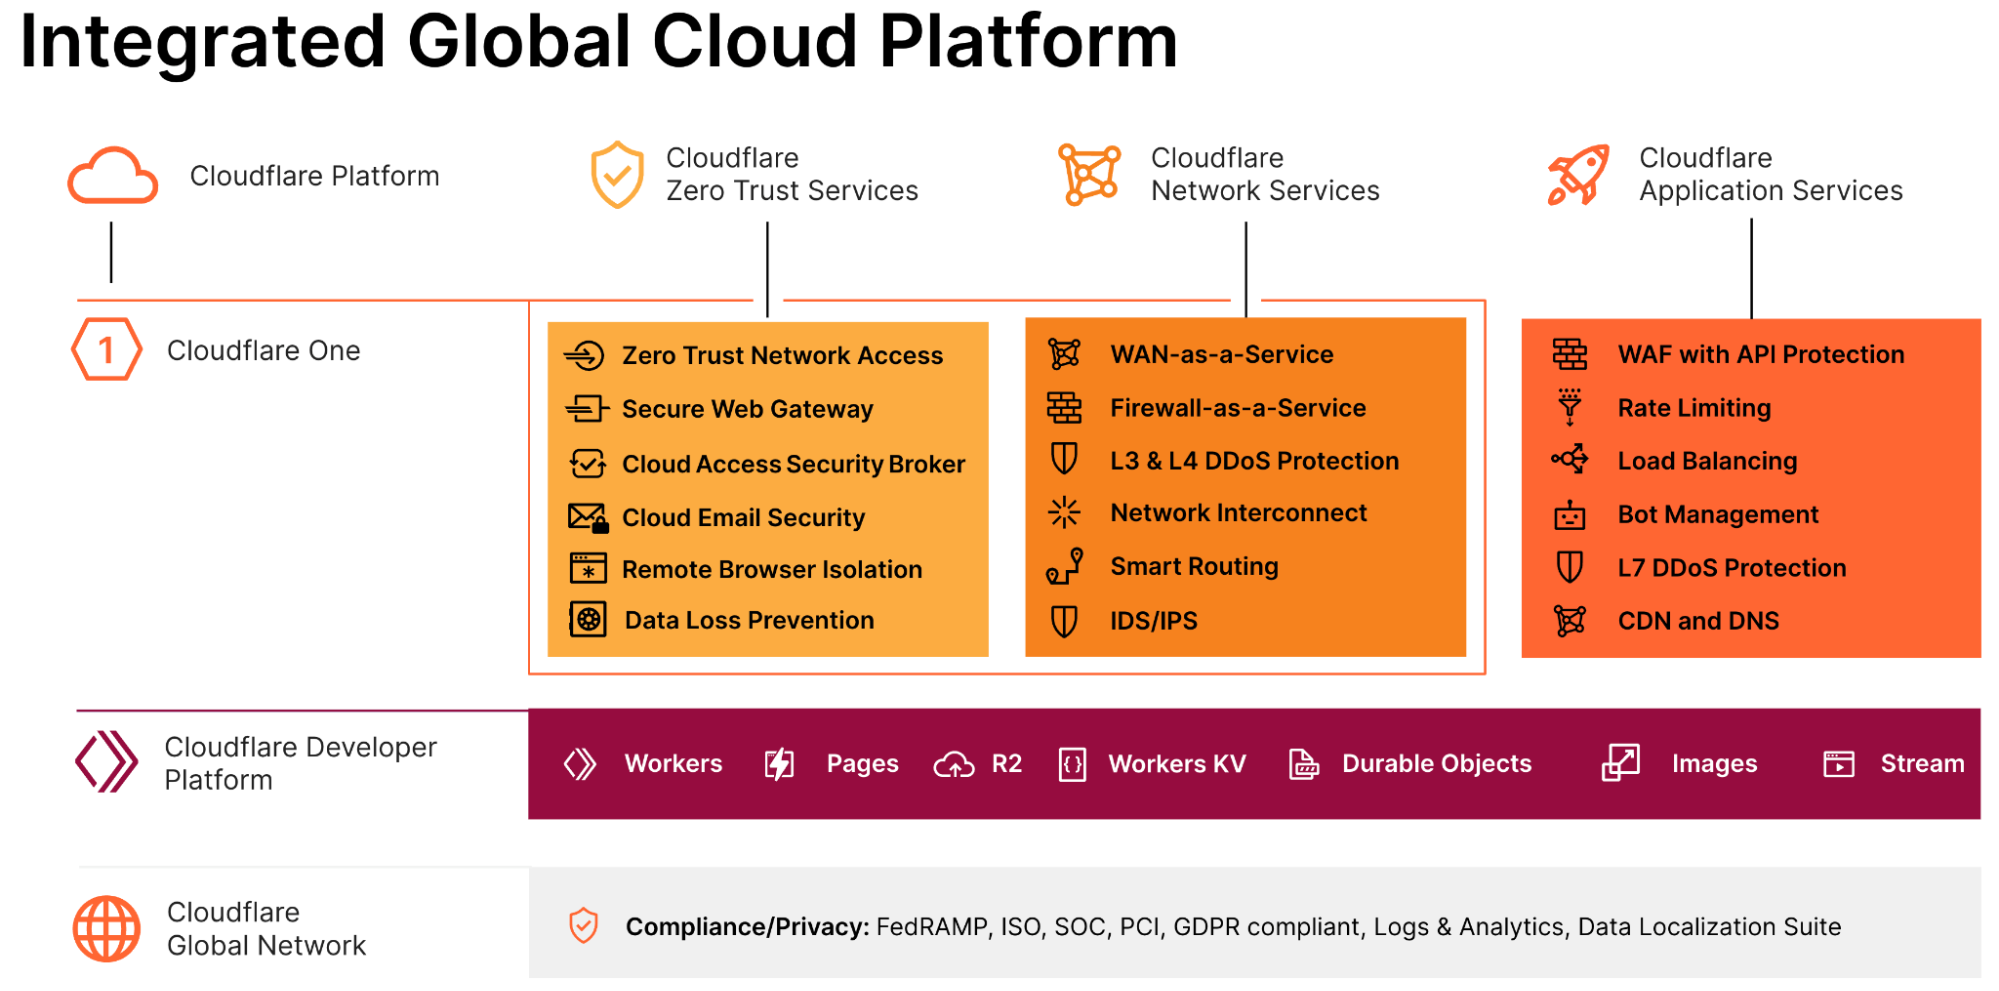 Cloudflare’s global platform integrates zero trust, network and application services through several product suites including Cloudflare One, Cloudflare’s Developer Platform and our compliance and privacy features.